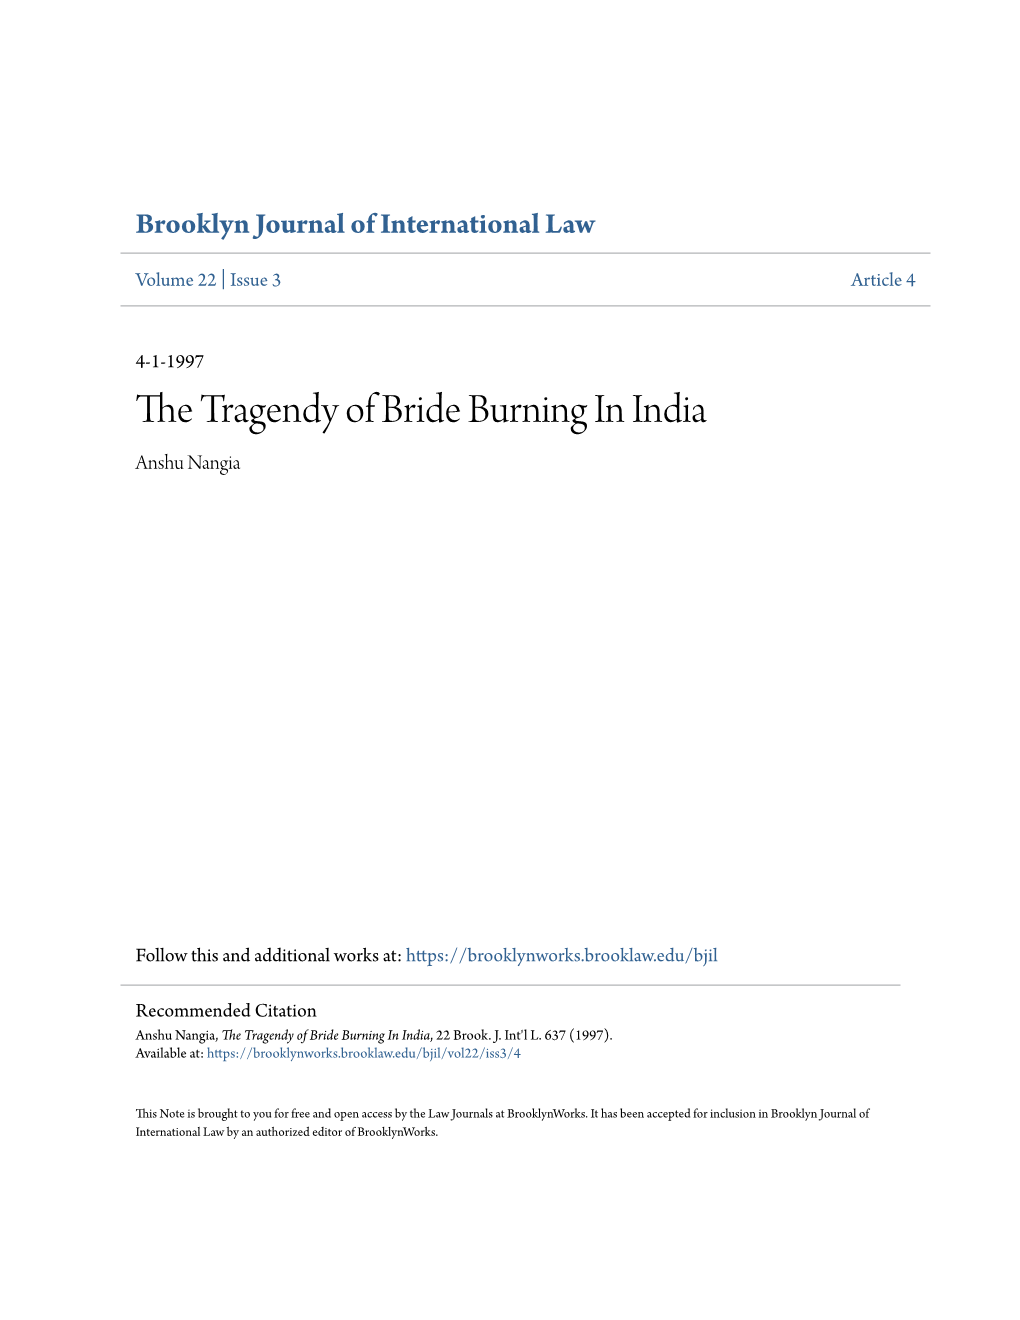 The Tragendy of Bride Burning in India, 22 Brook